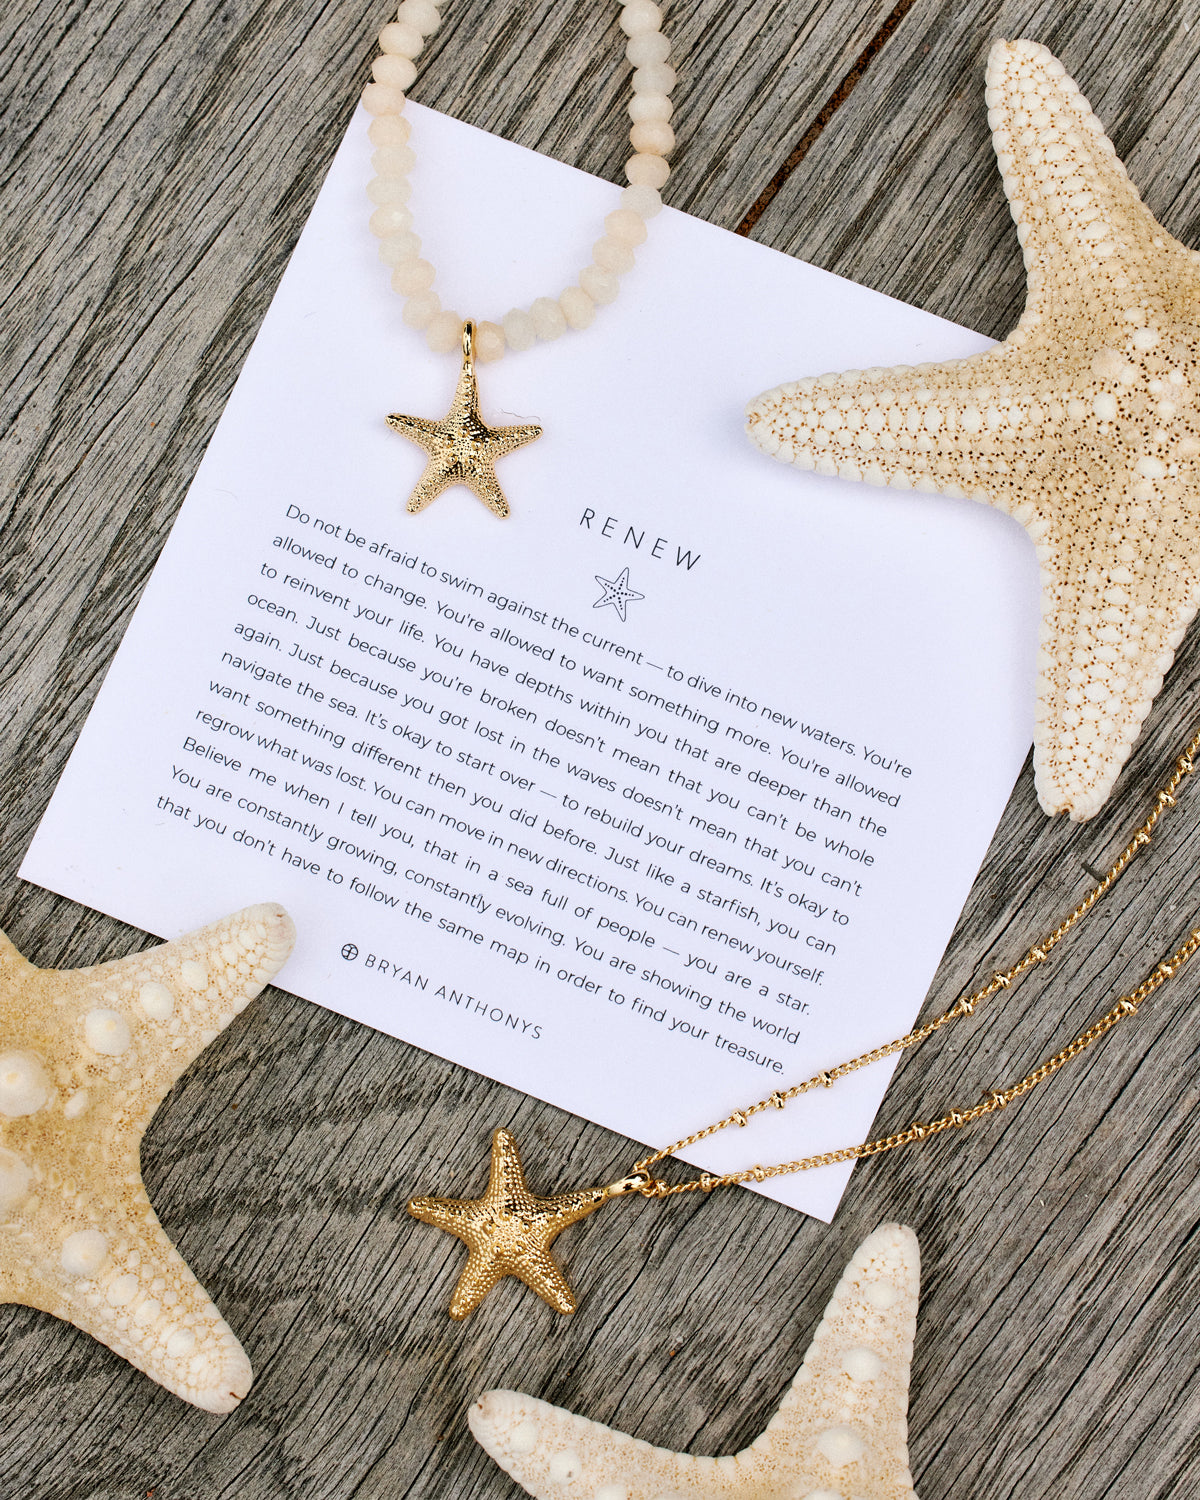 Renew Starfish Opal Beaded Necklace and Pendant Necklace in Gold with Meaning Card and Starfishes